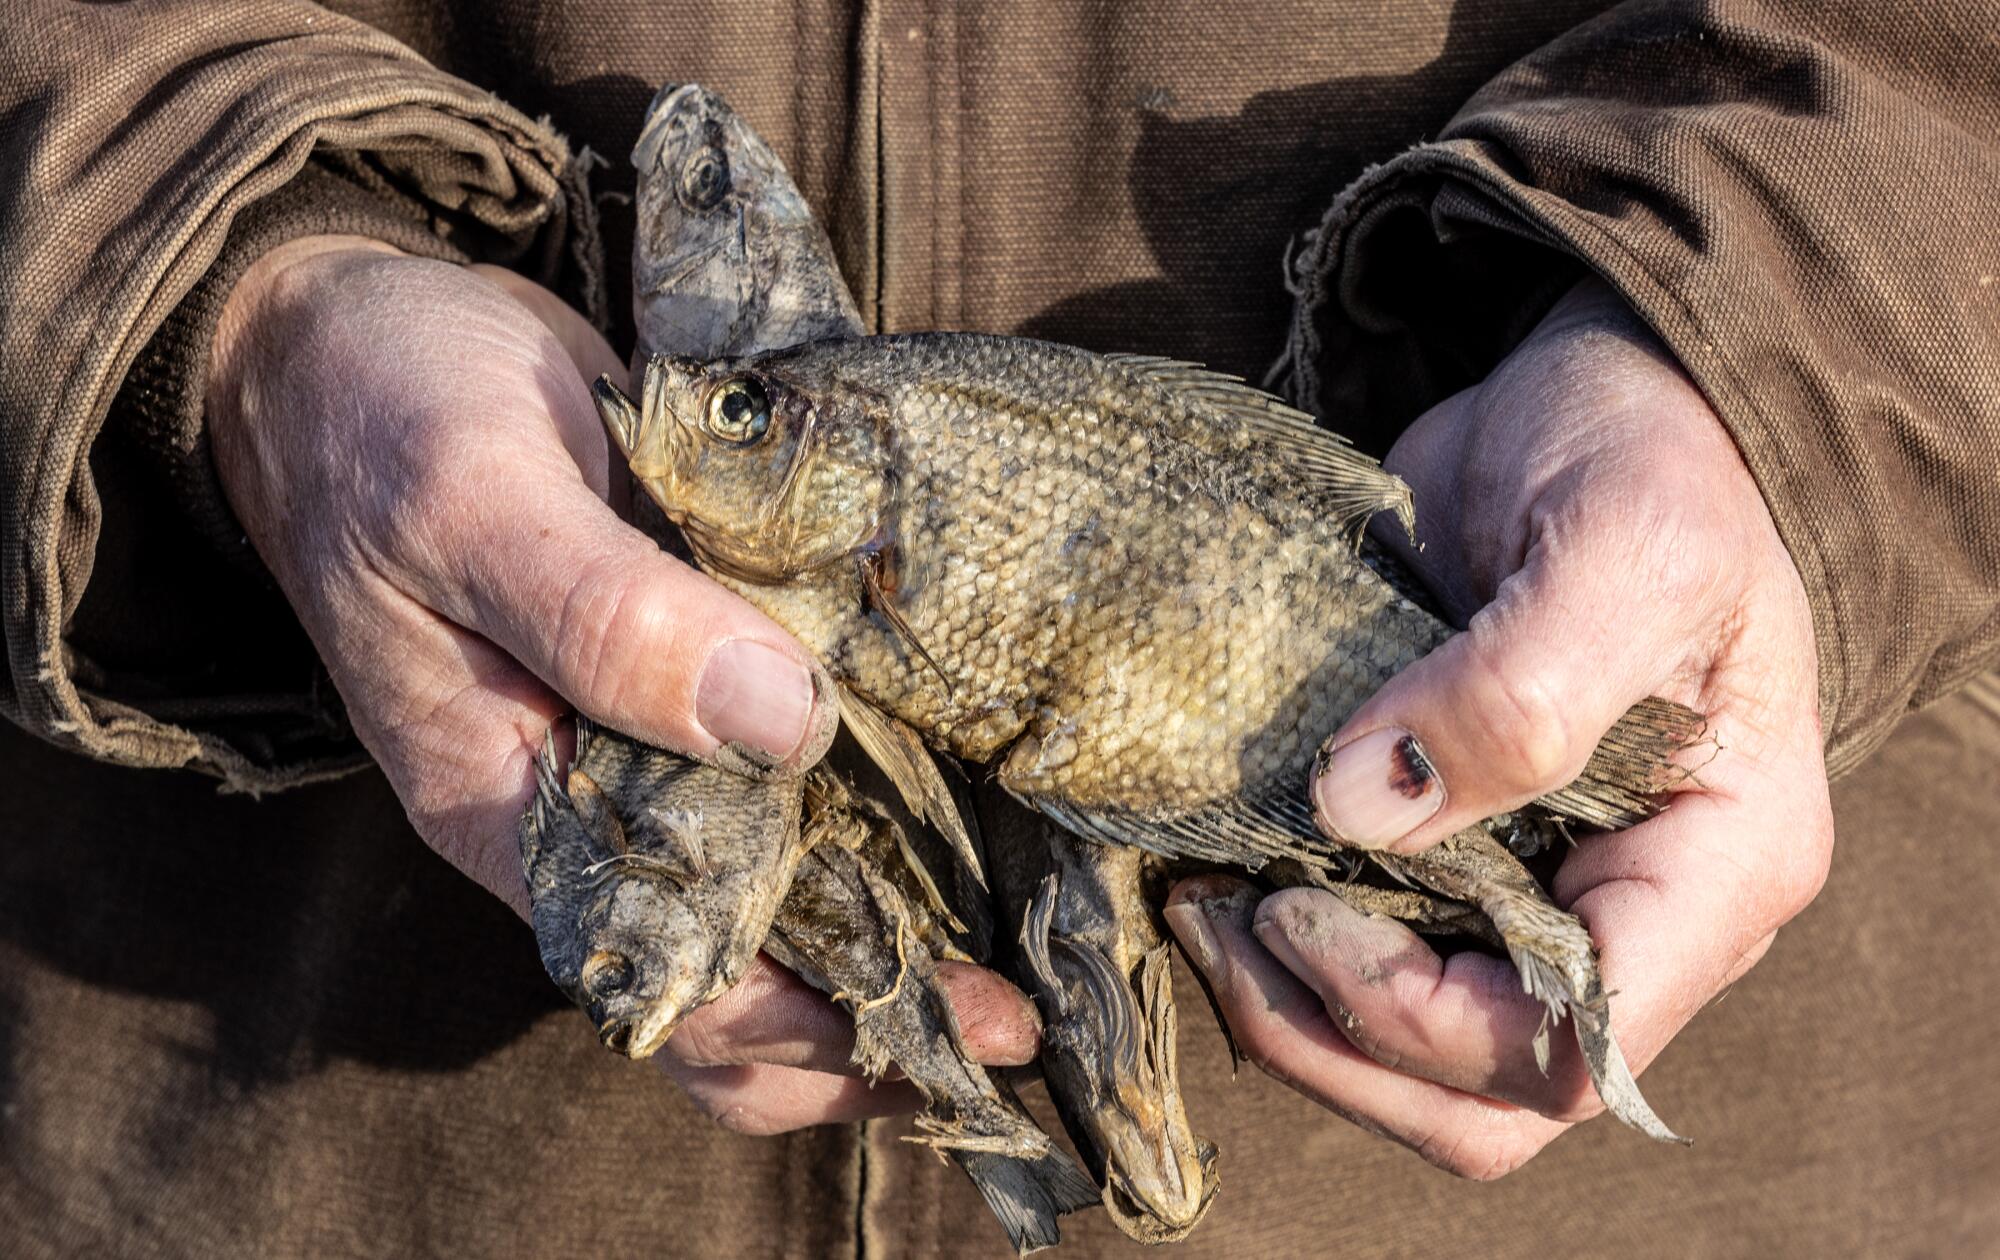 A closeup of a pair of hands holding the dried remains of several small fish